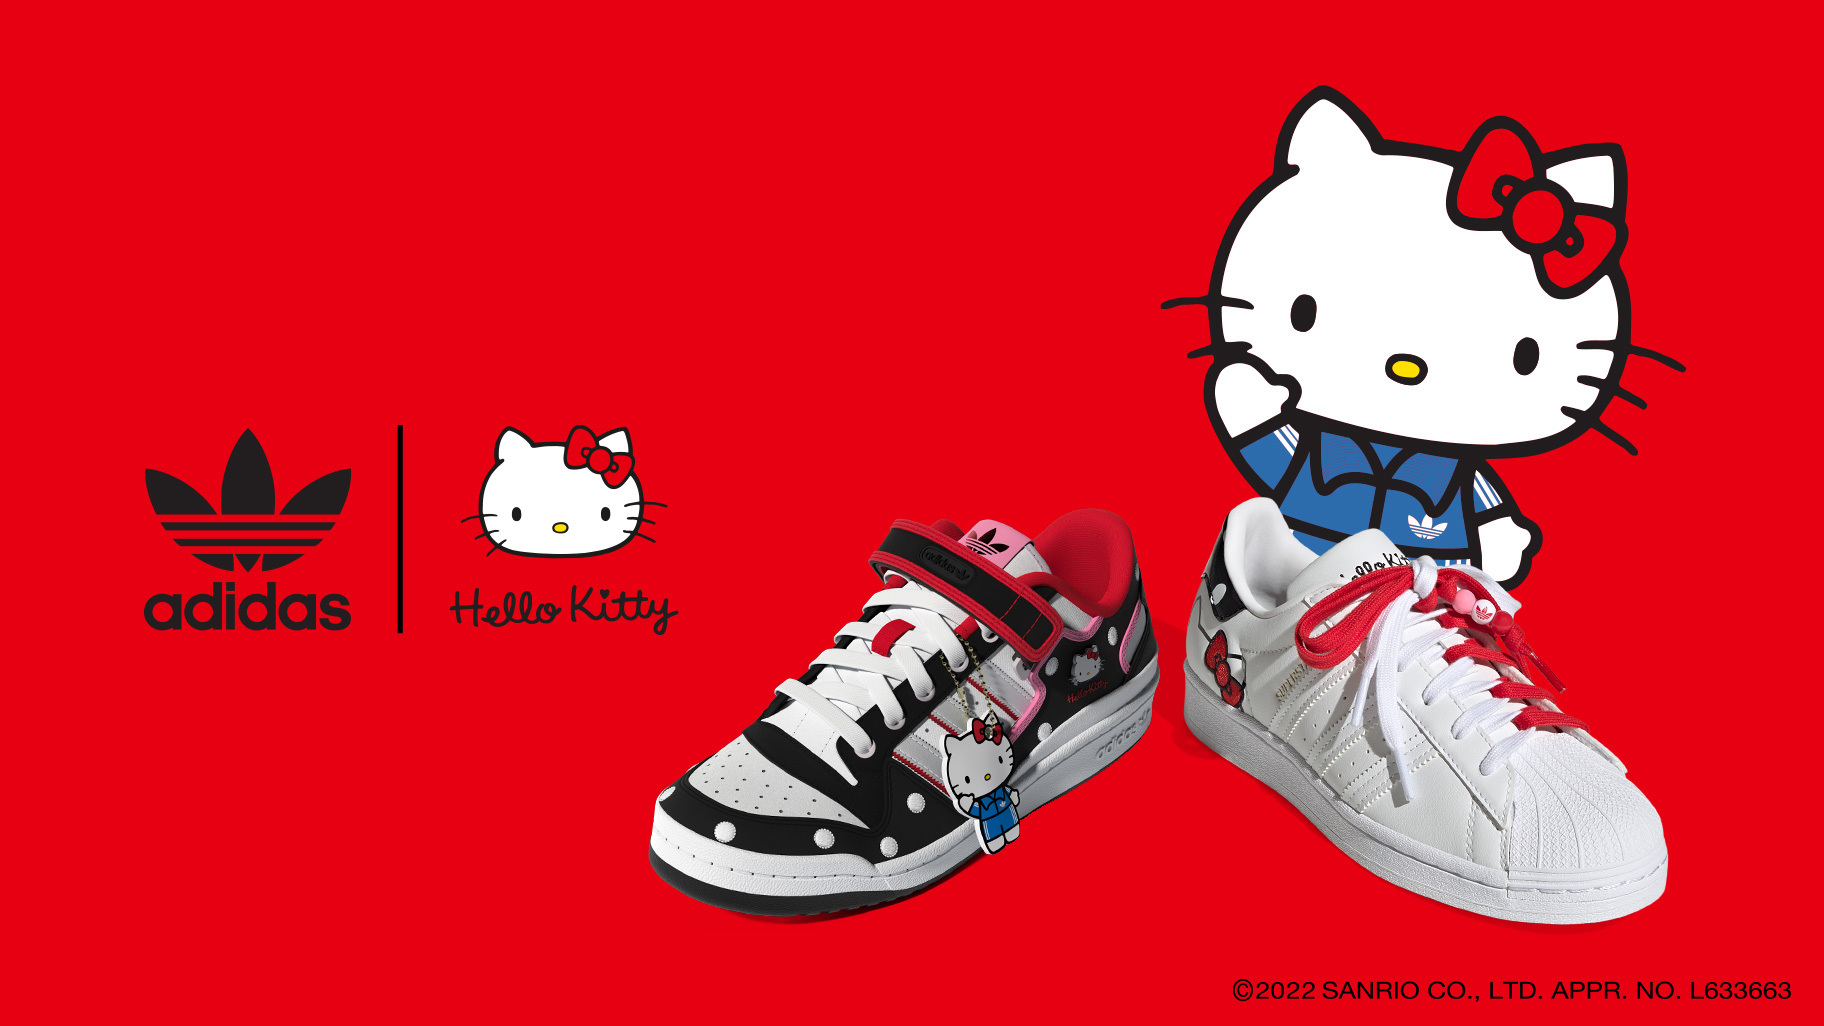 Adidas an adorable Kitty sneakers and accessories